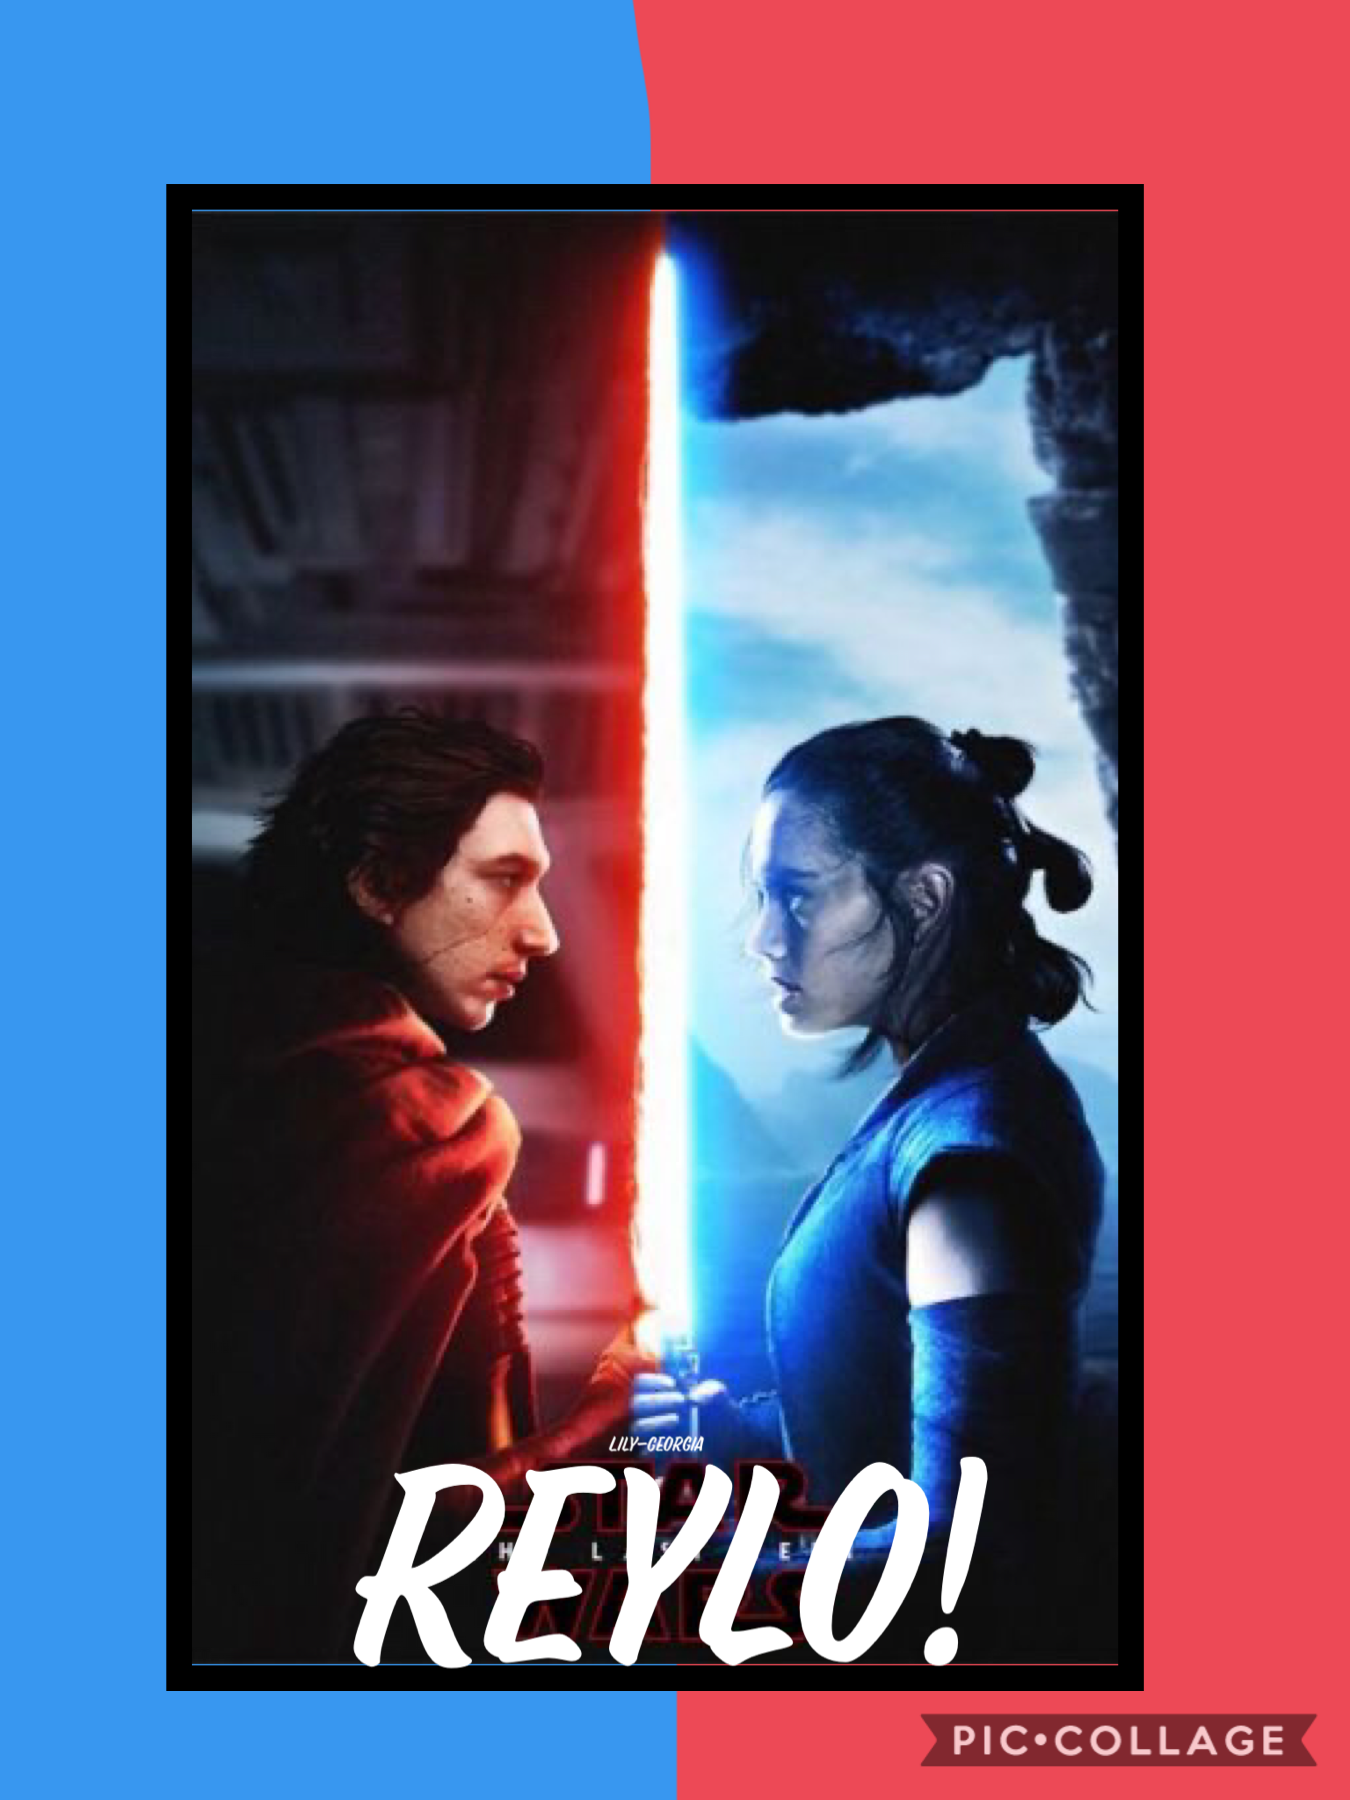 Anyone who doesn’t ship Reylo get away from me! P.S jk